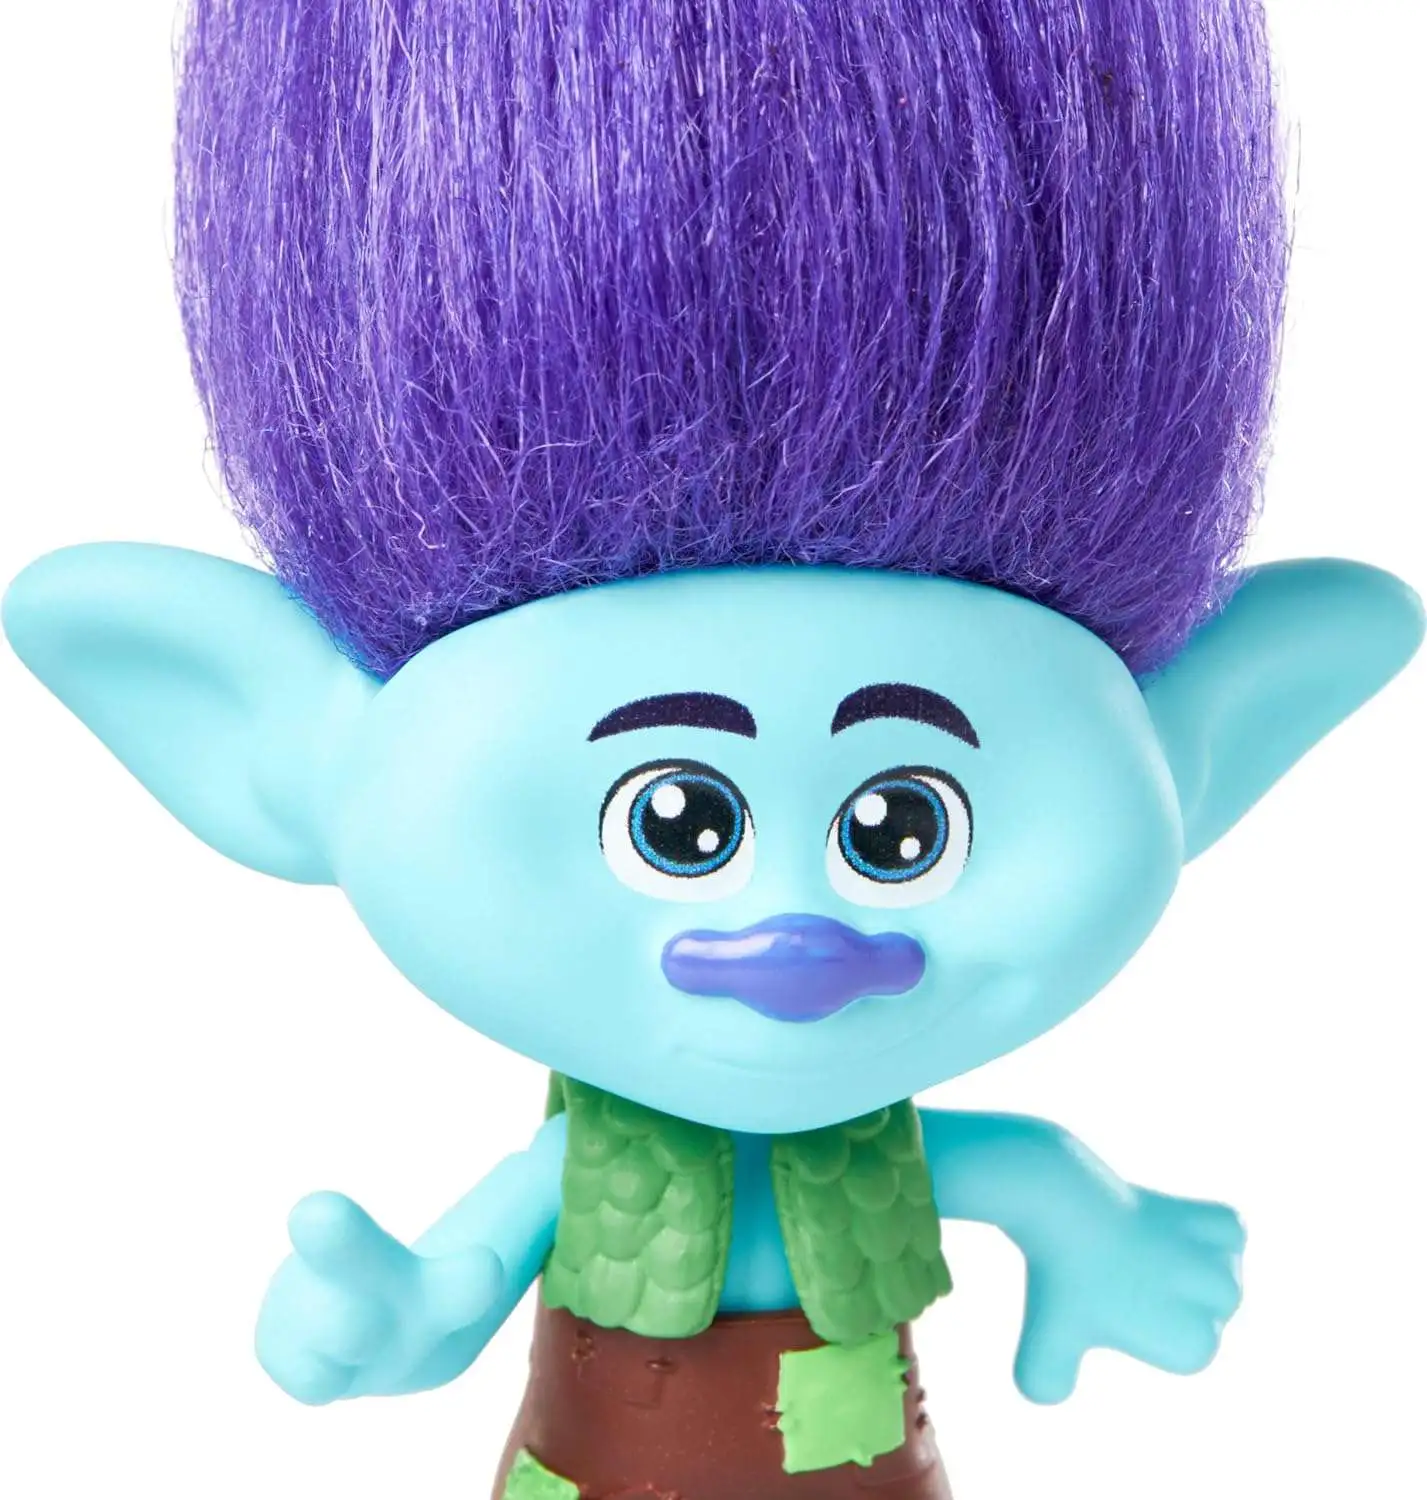 Trolls Band Together Queen Poppy, Viva & Branch Mini Doll 3-Pack